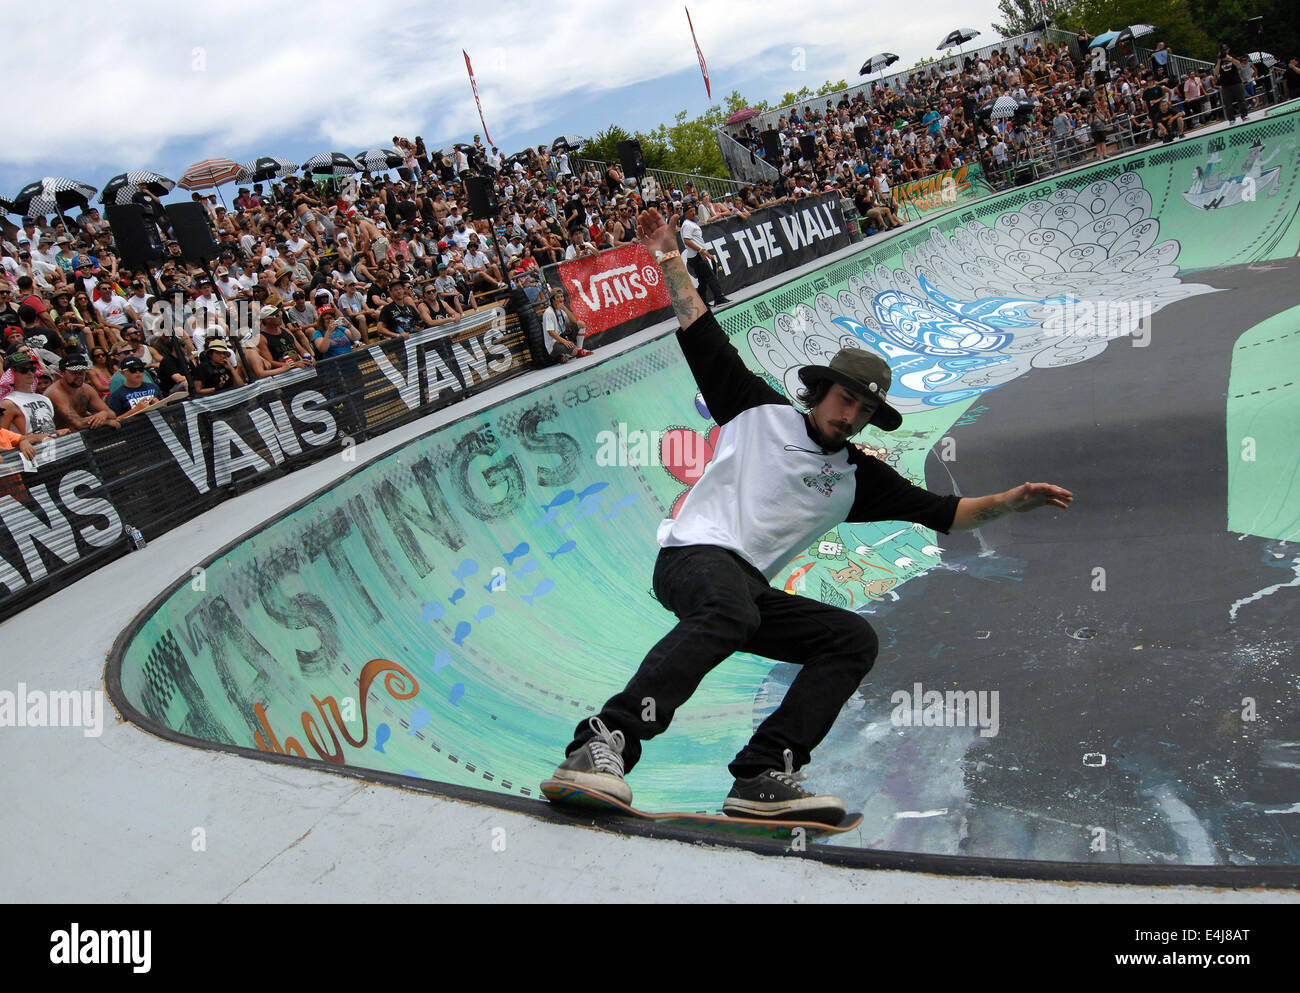 Vancouver, Canada. 12th July, 2014. Kevin Kowalski of the United States  competes in the 2014 Van Doren Invitational skateboard competition in  Vancouver, Canada, July 12, 2014. World's best skaters gathered here to